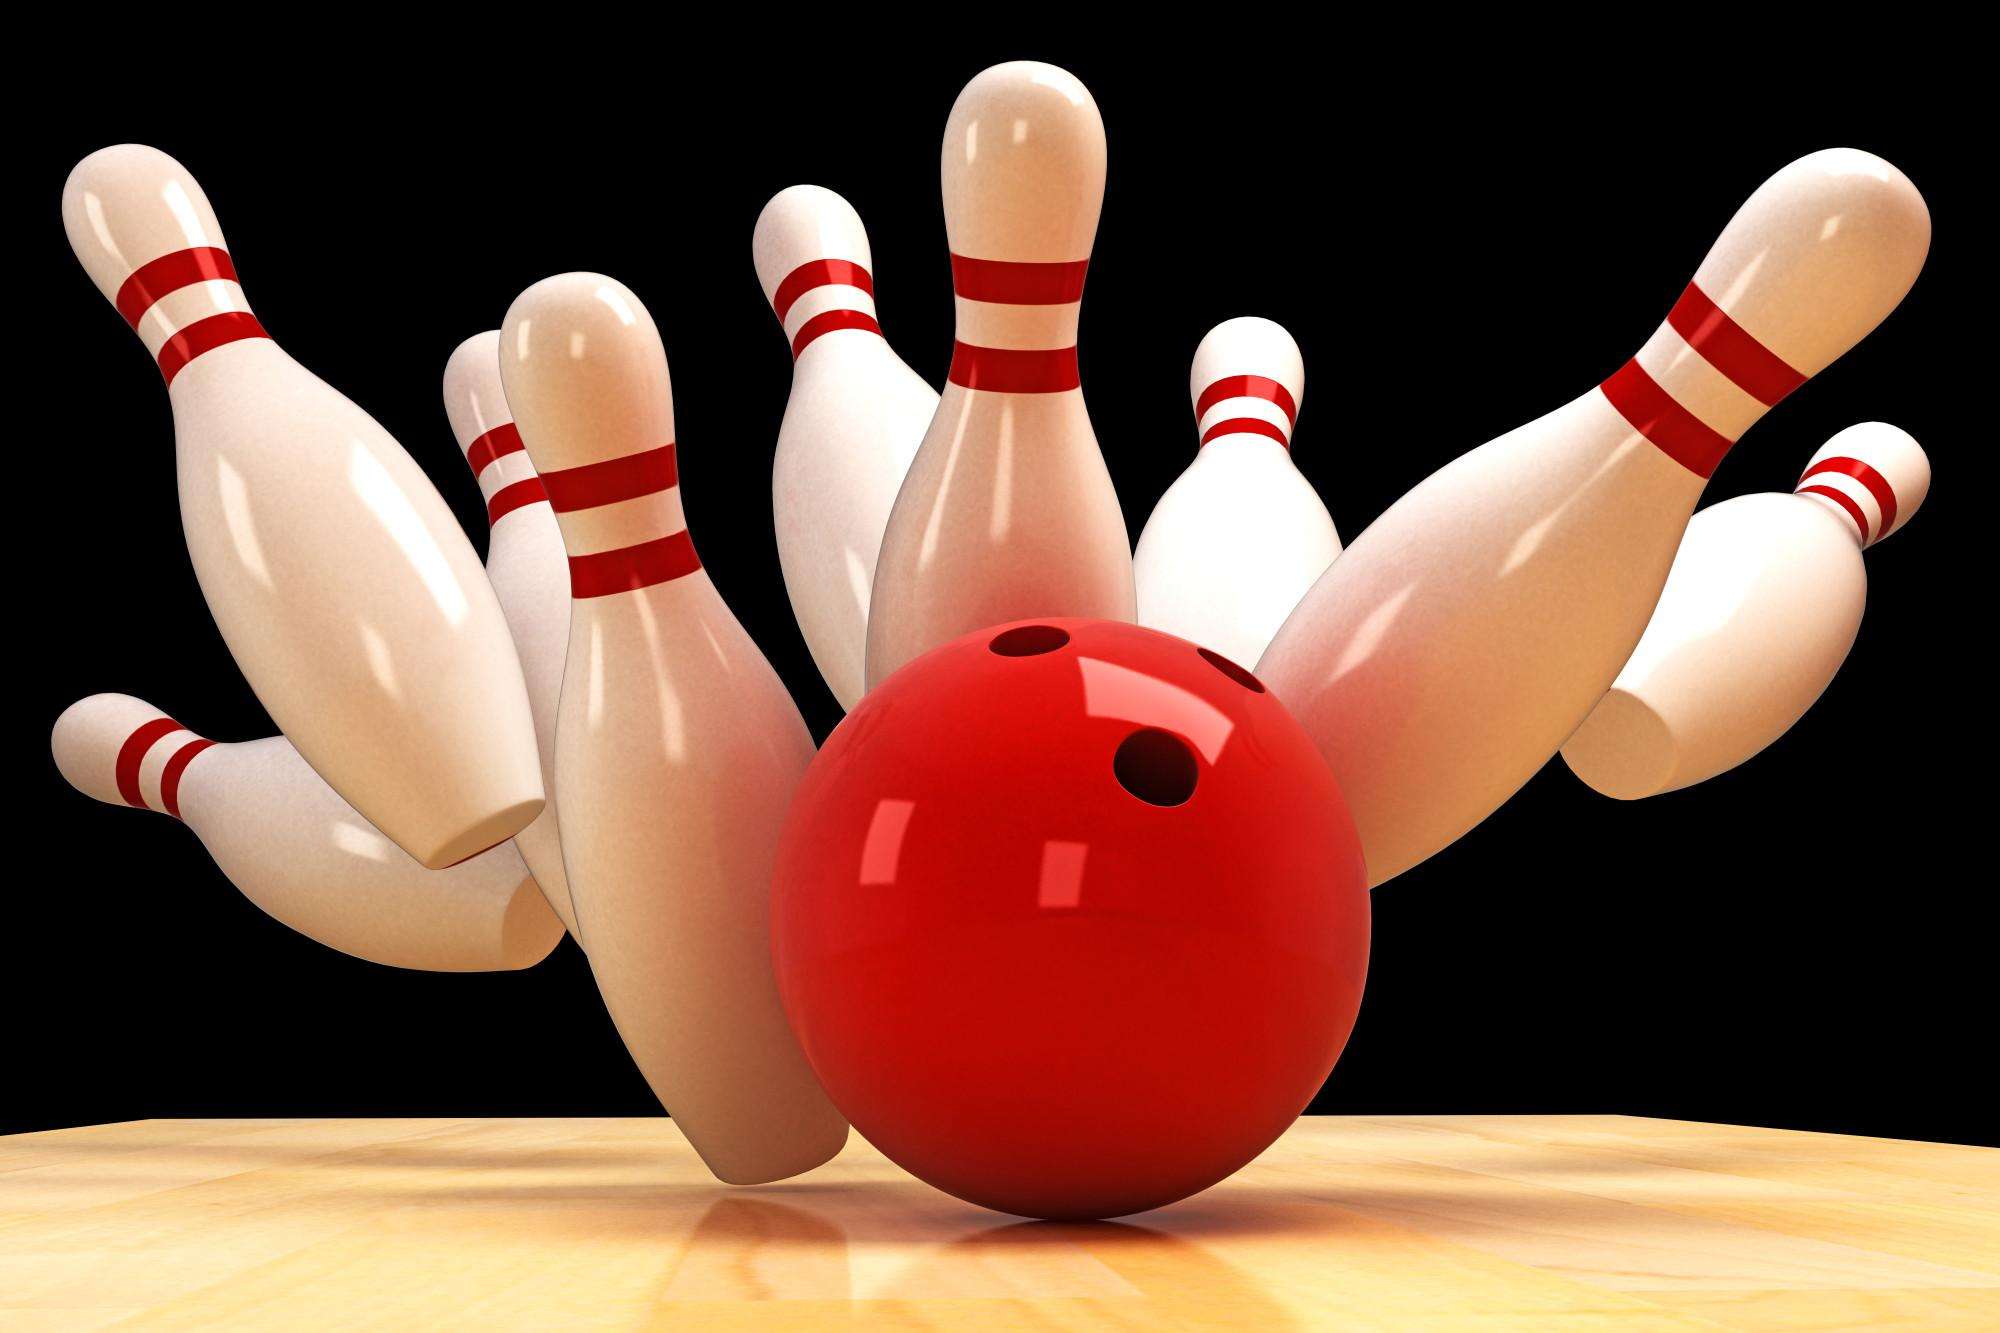 Bowling 101 A Complete Guide to the Essential Bowling Rules